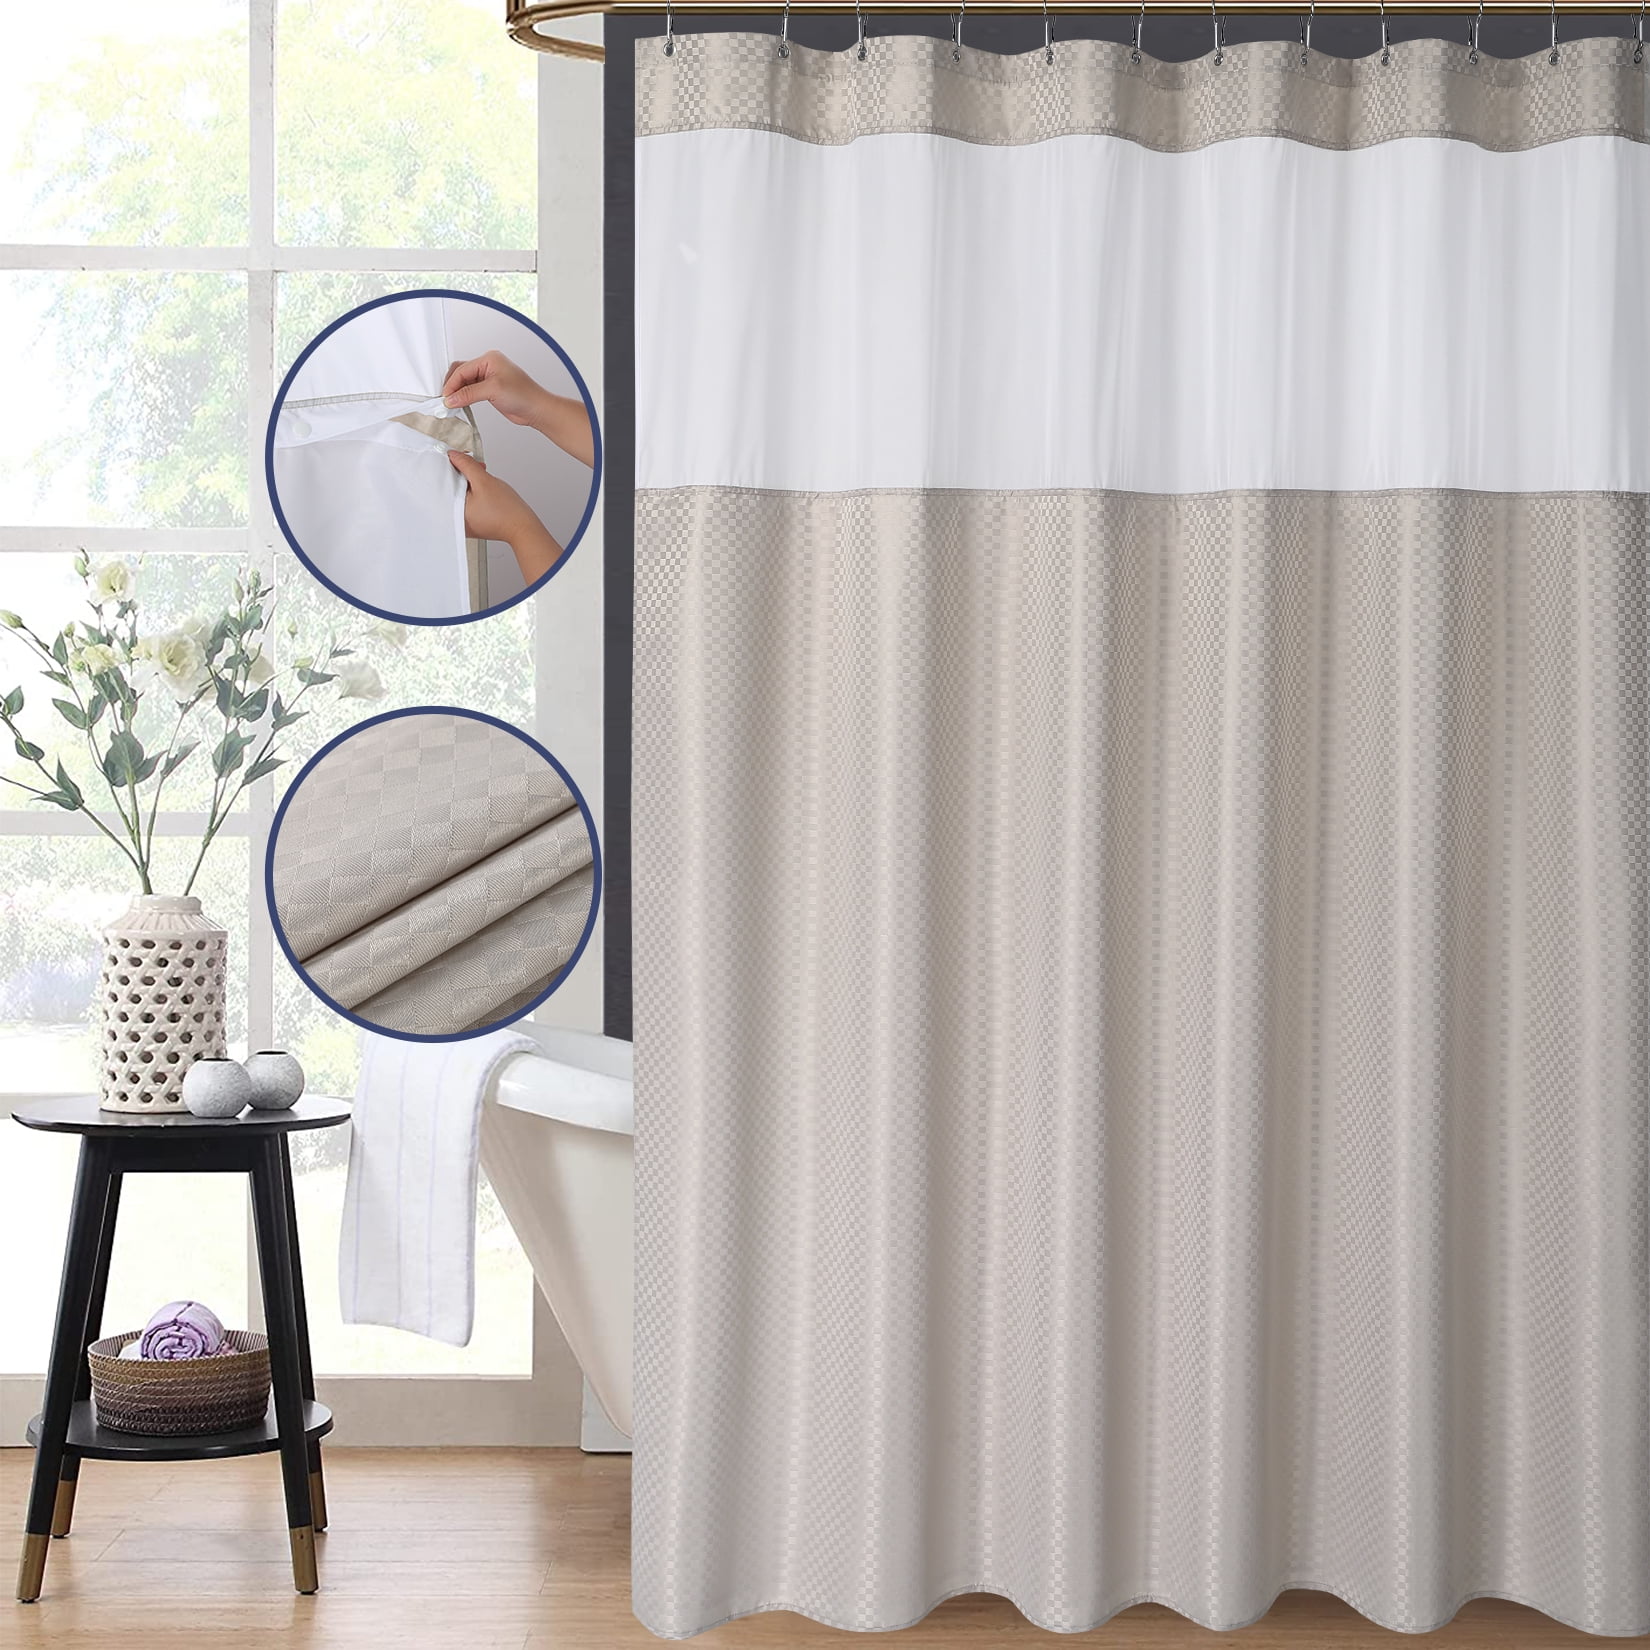 Ruffle Shower Curtain,84-inches Extra Extra Long72" W x 84" L White 